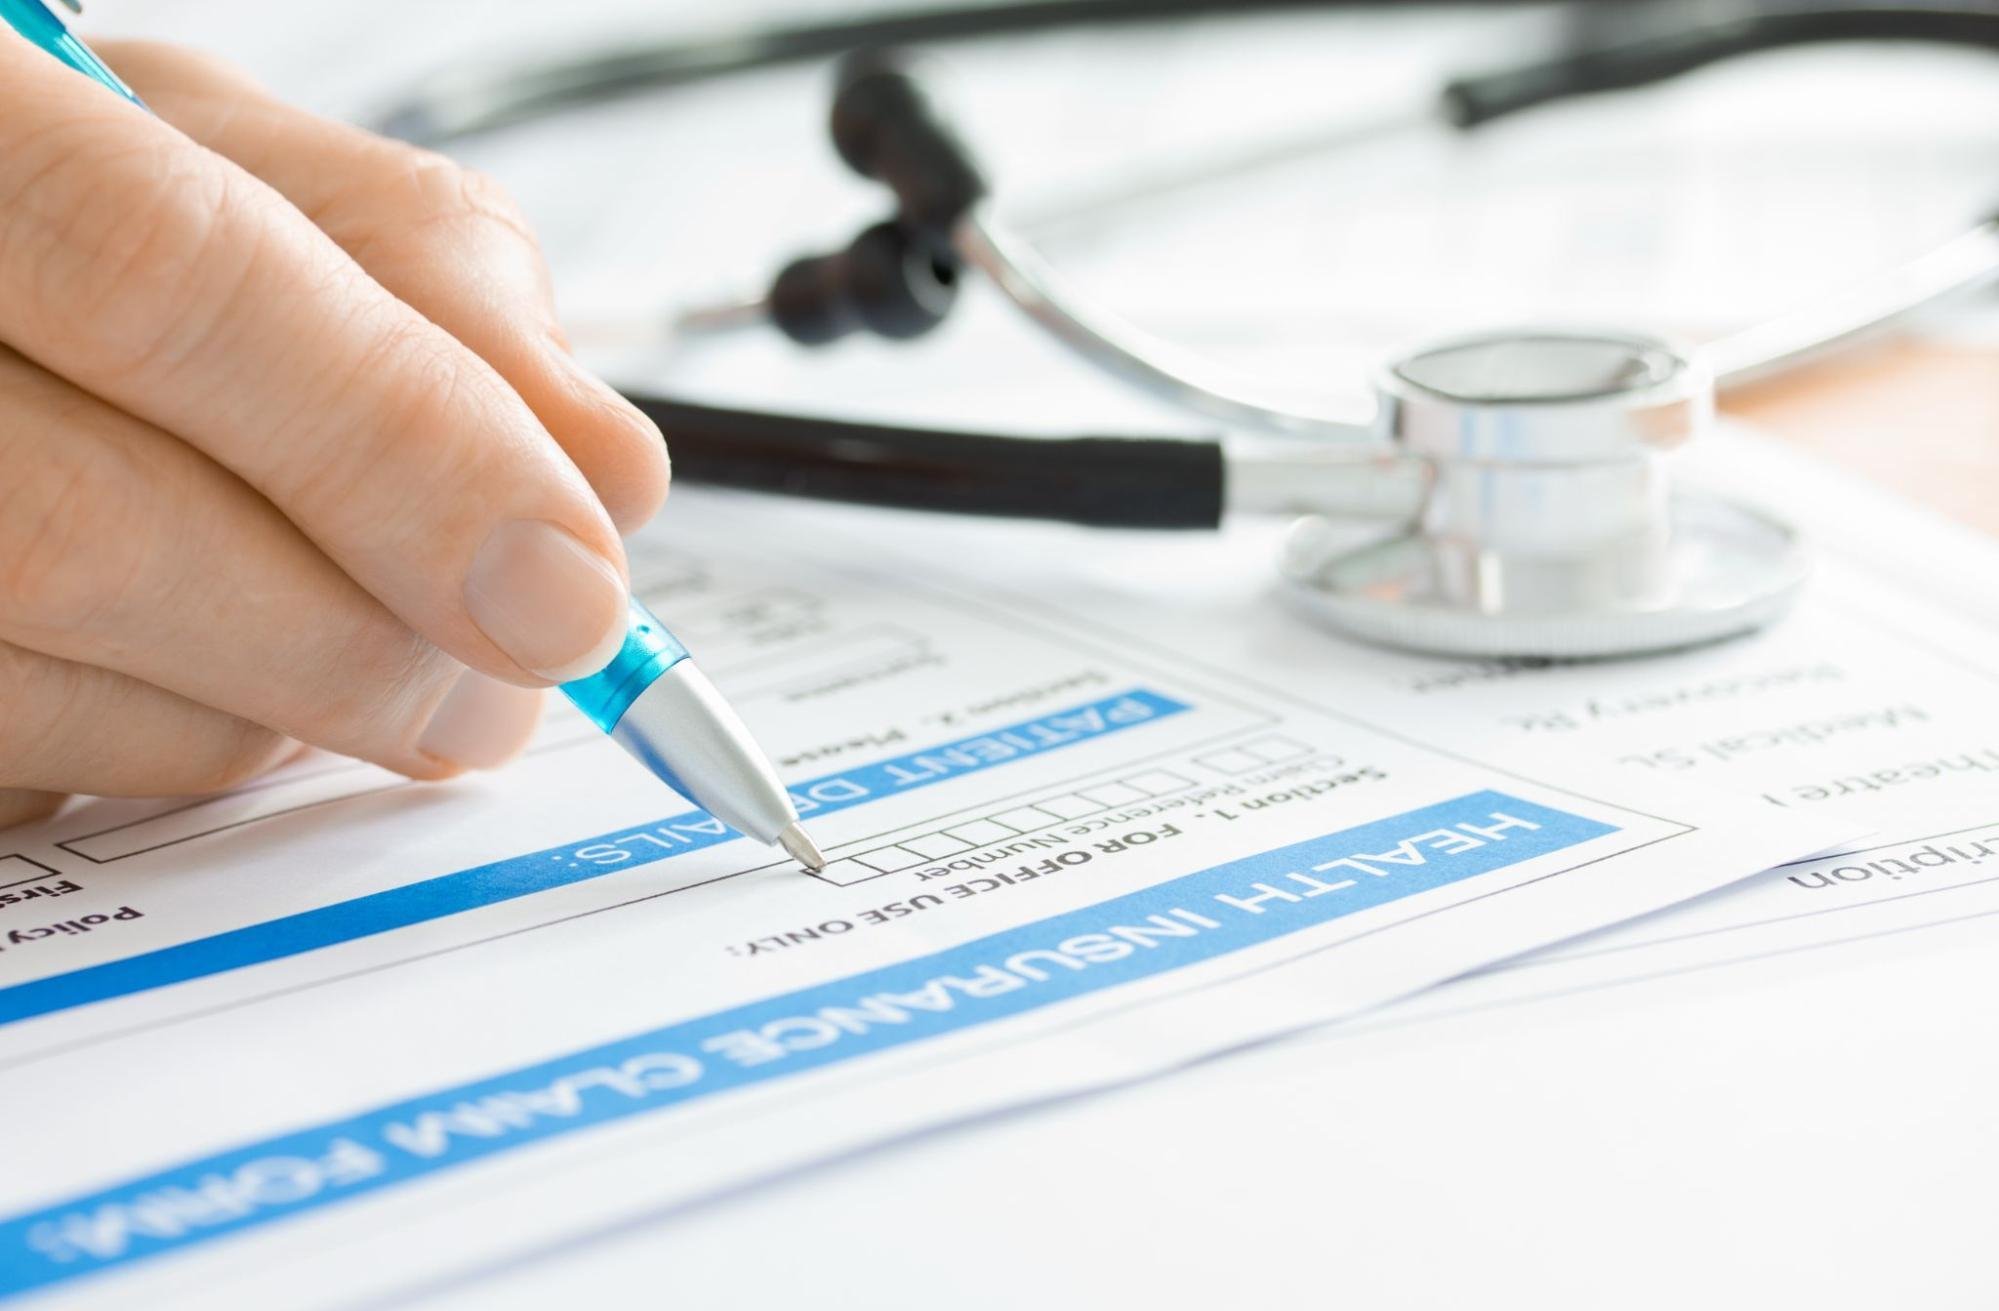 A patient is filling out a health insurance claim form